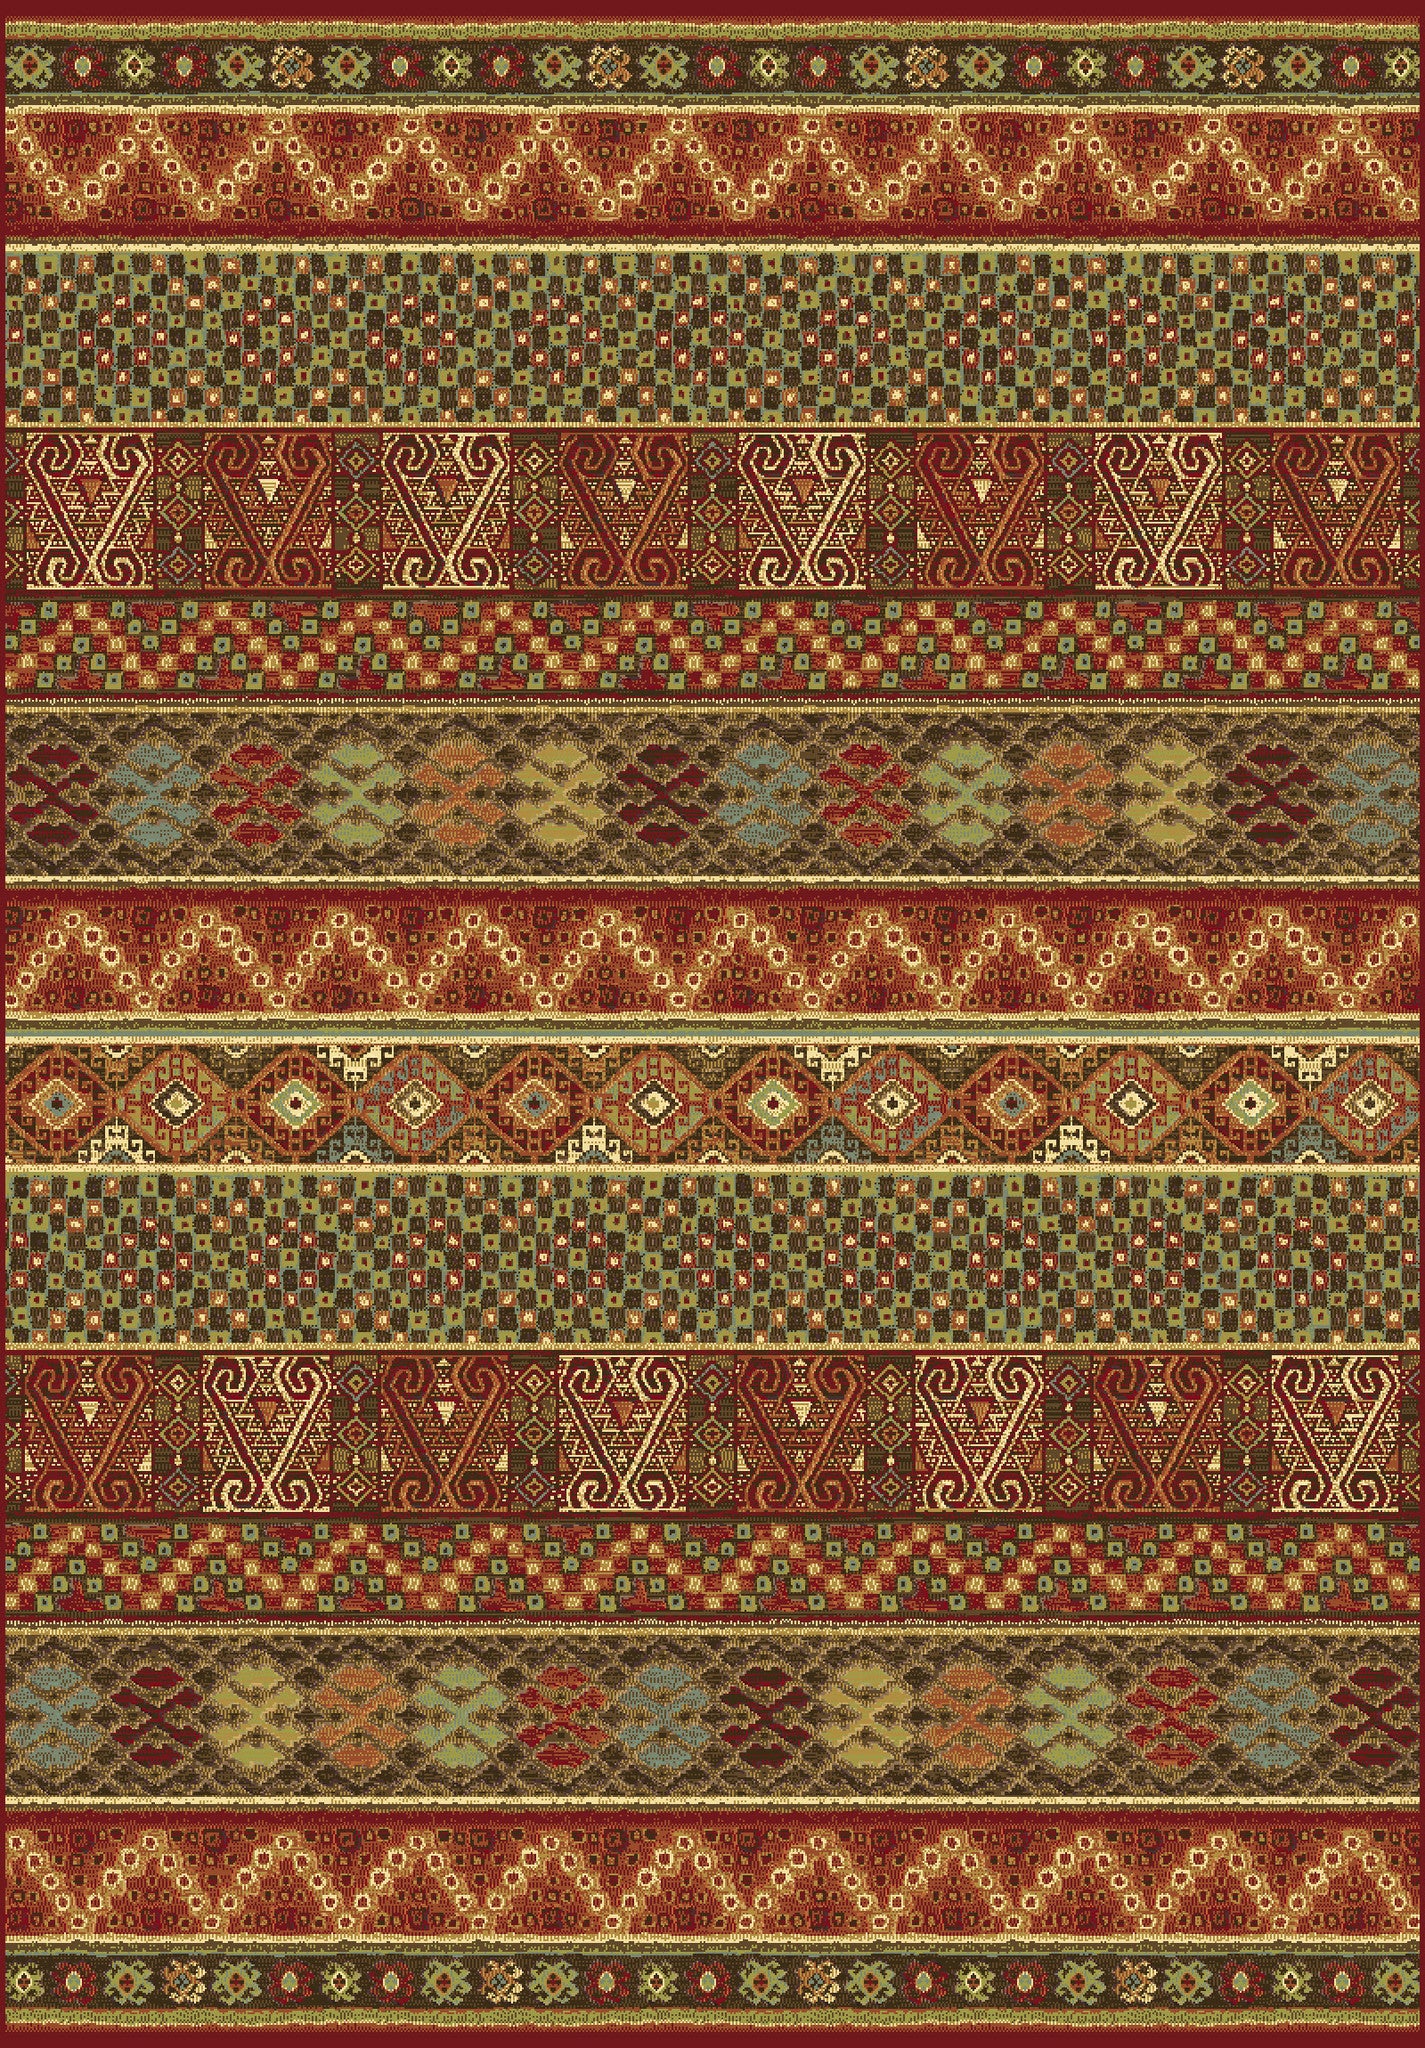 Dynamic Rugs Heritage 89386 Red/Multi Area Rug main image